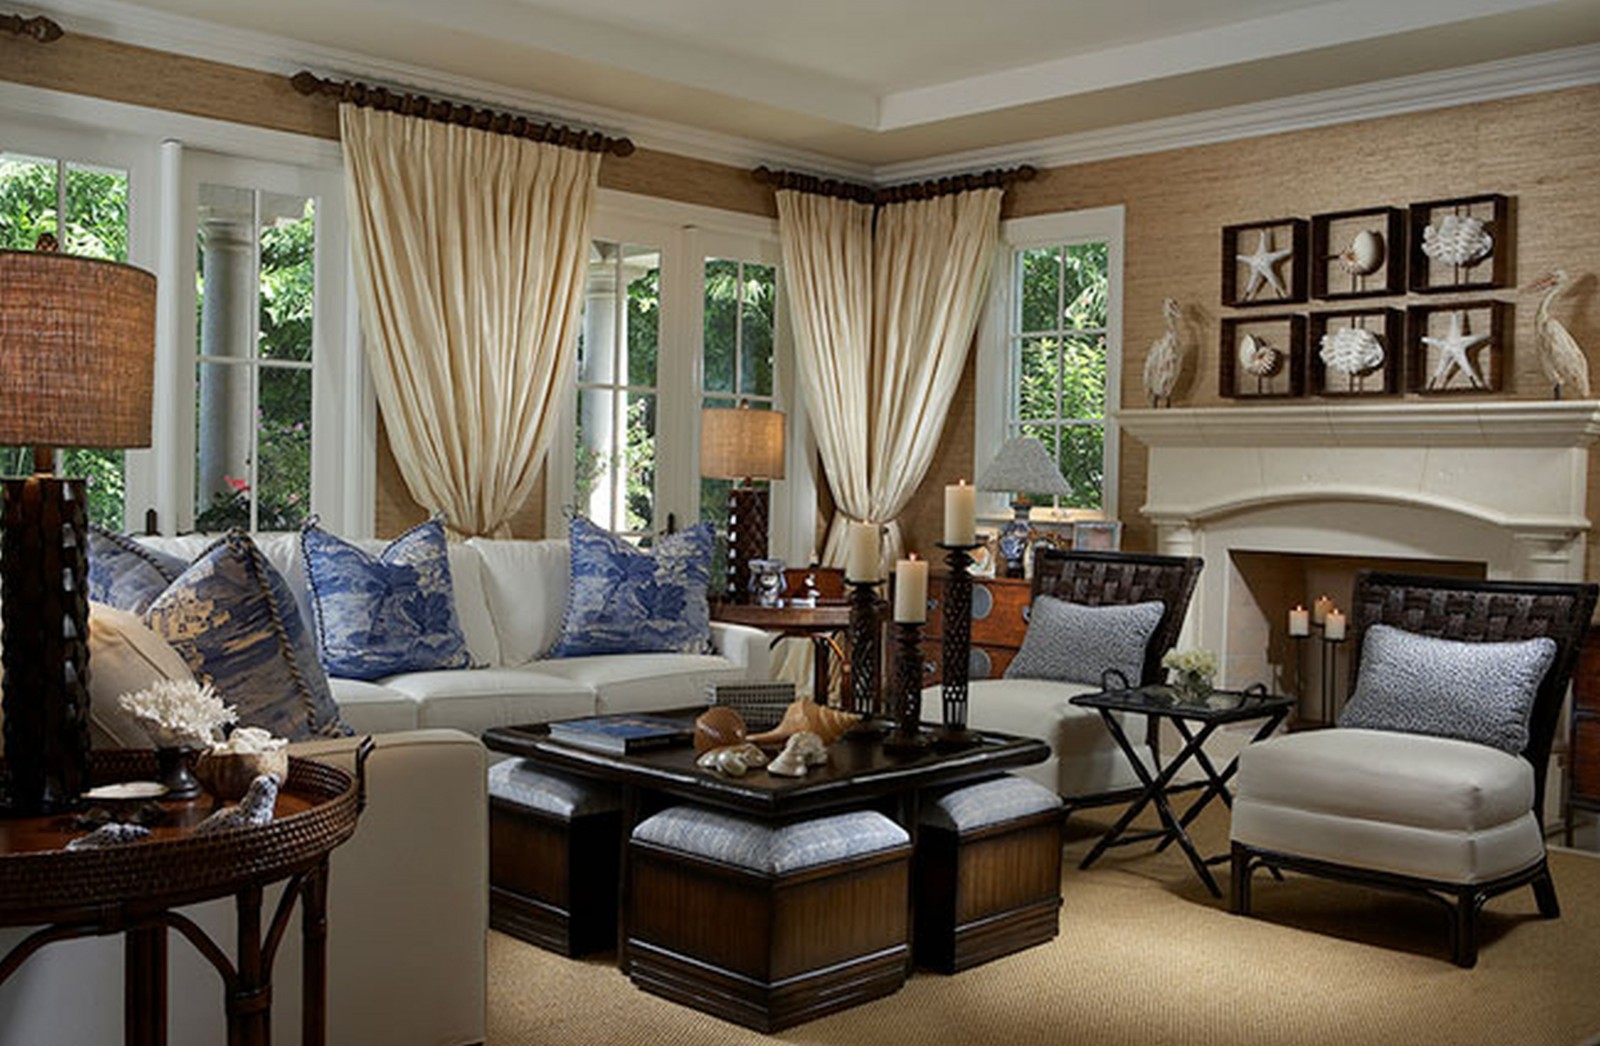 Blue And Brown Living Room Sets